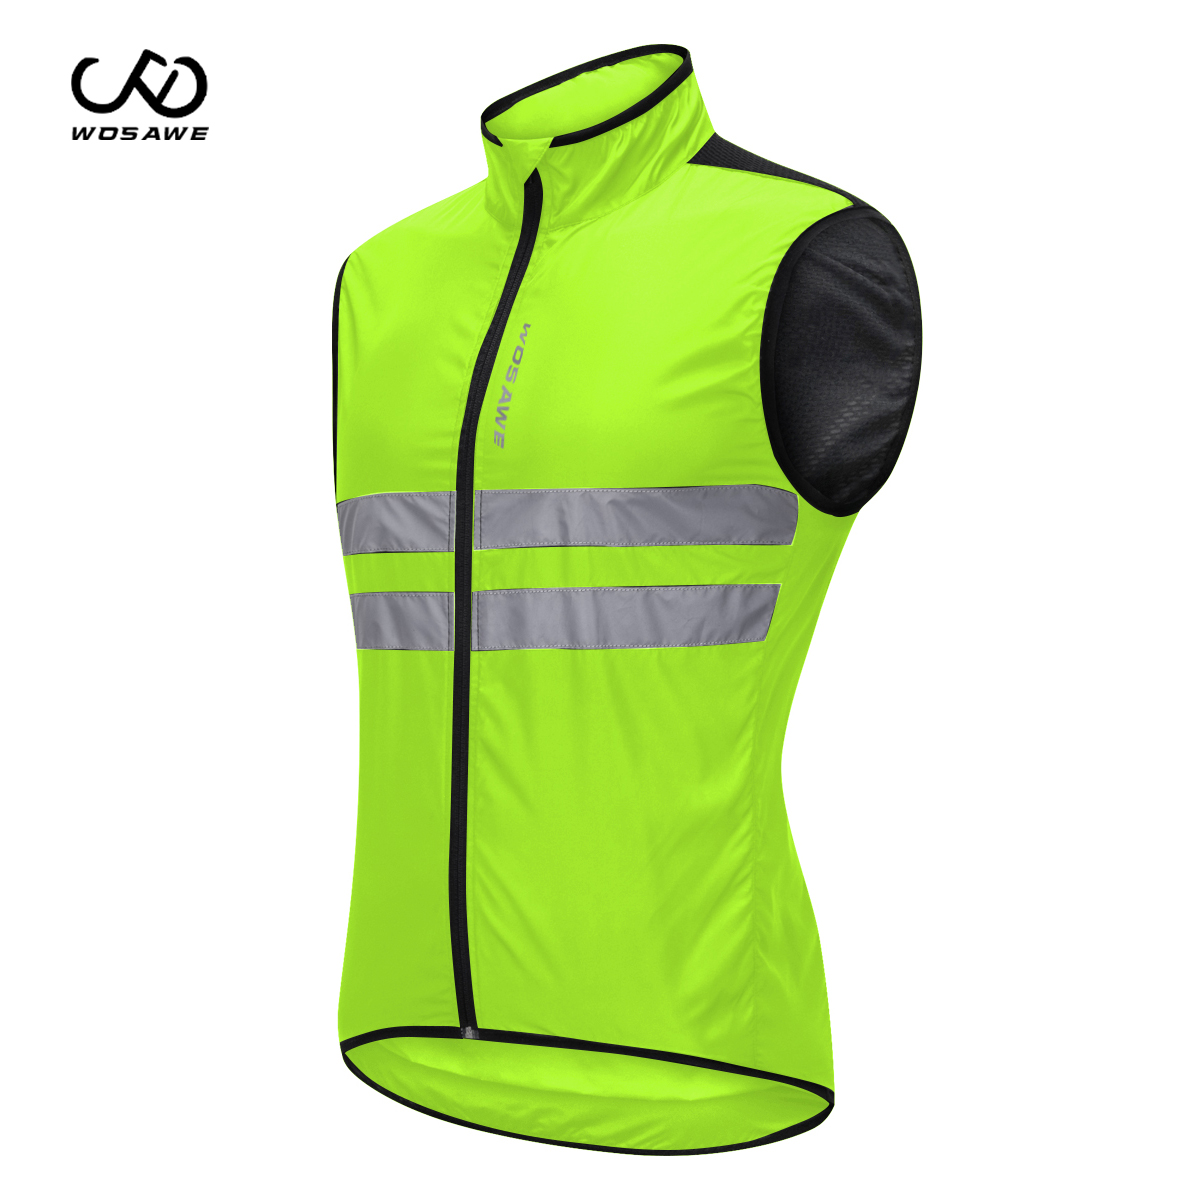 Breathable Men Cycling Vest Mesh Back Tank Top Gillet Waistcoat for Running